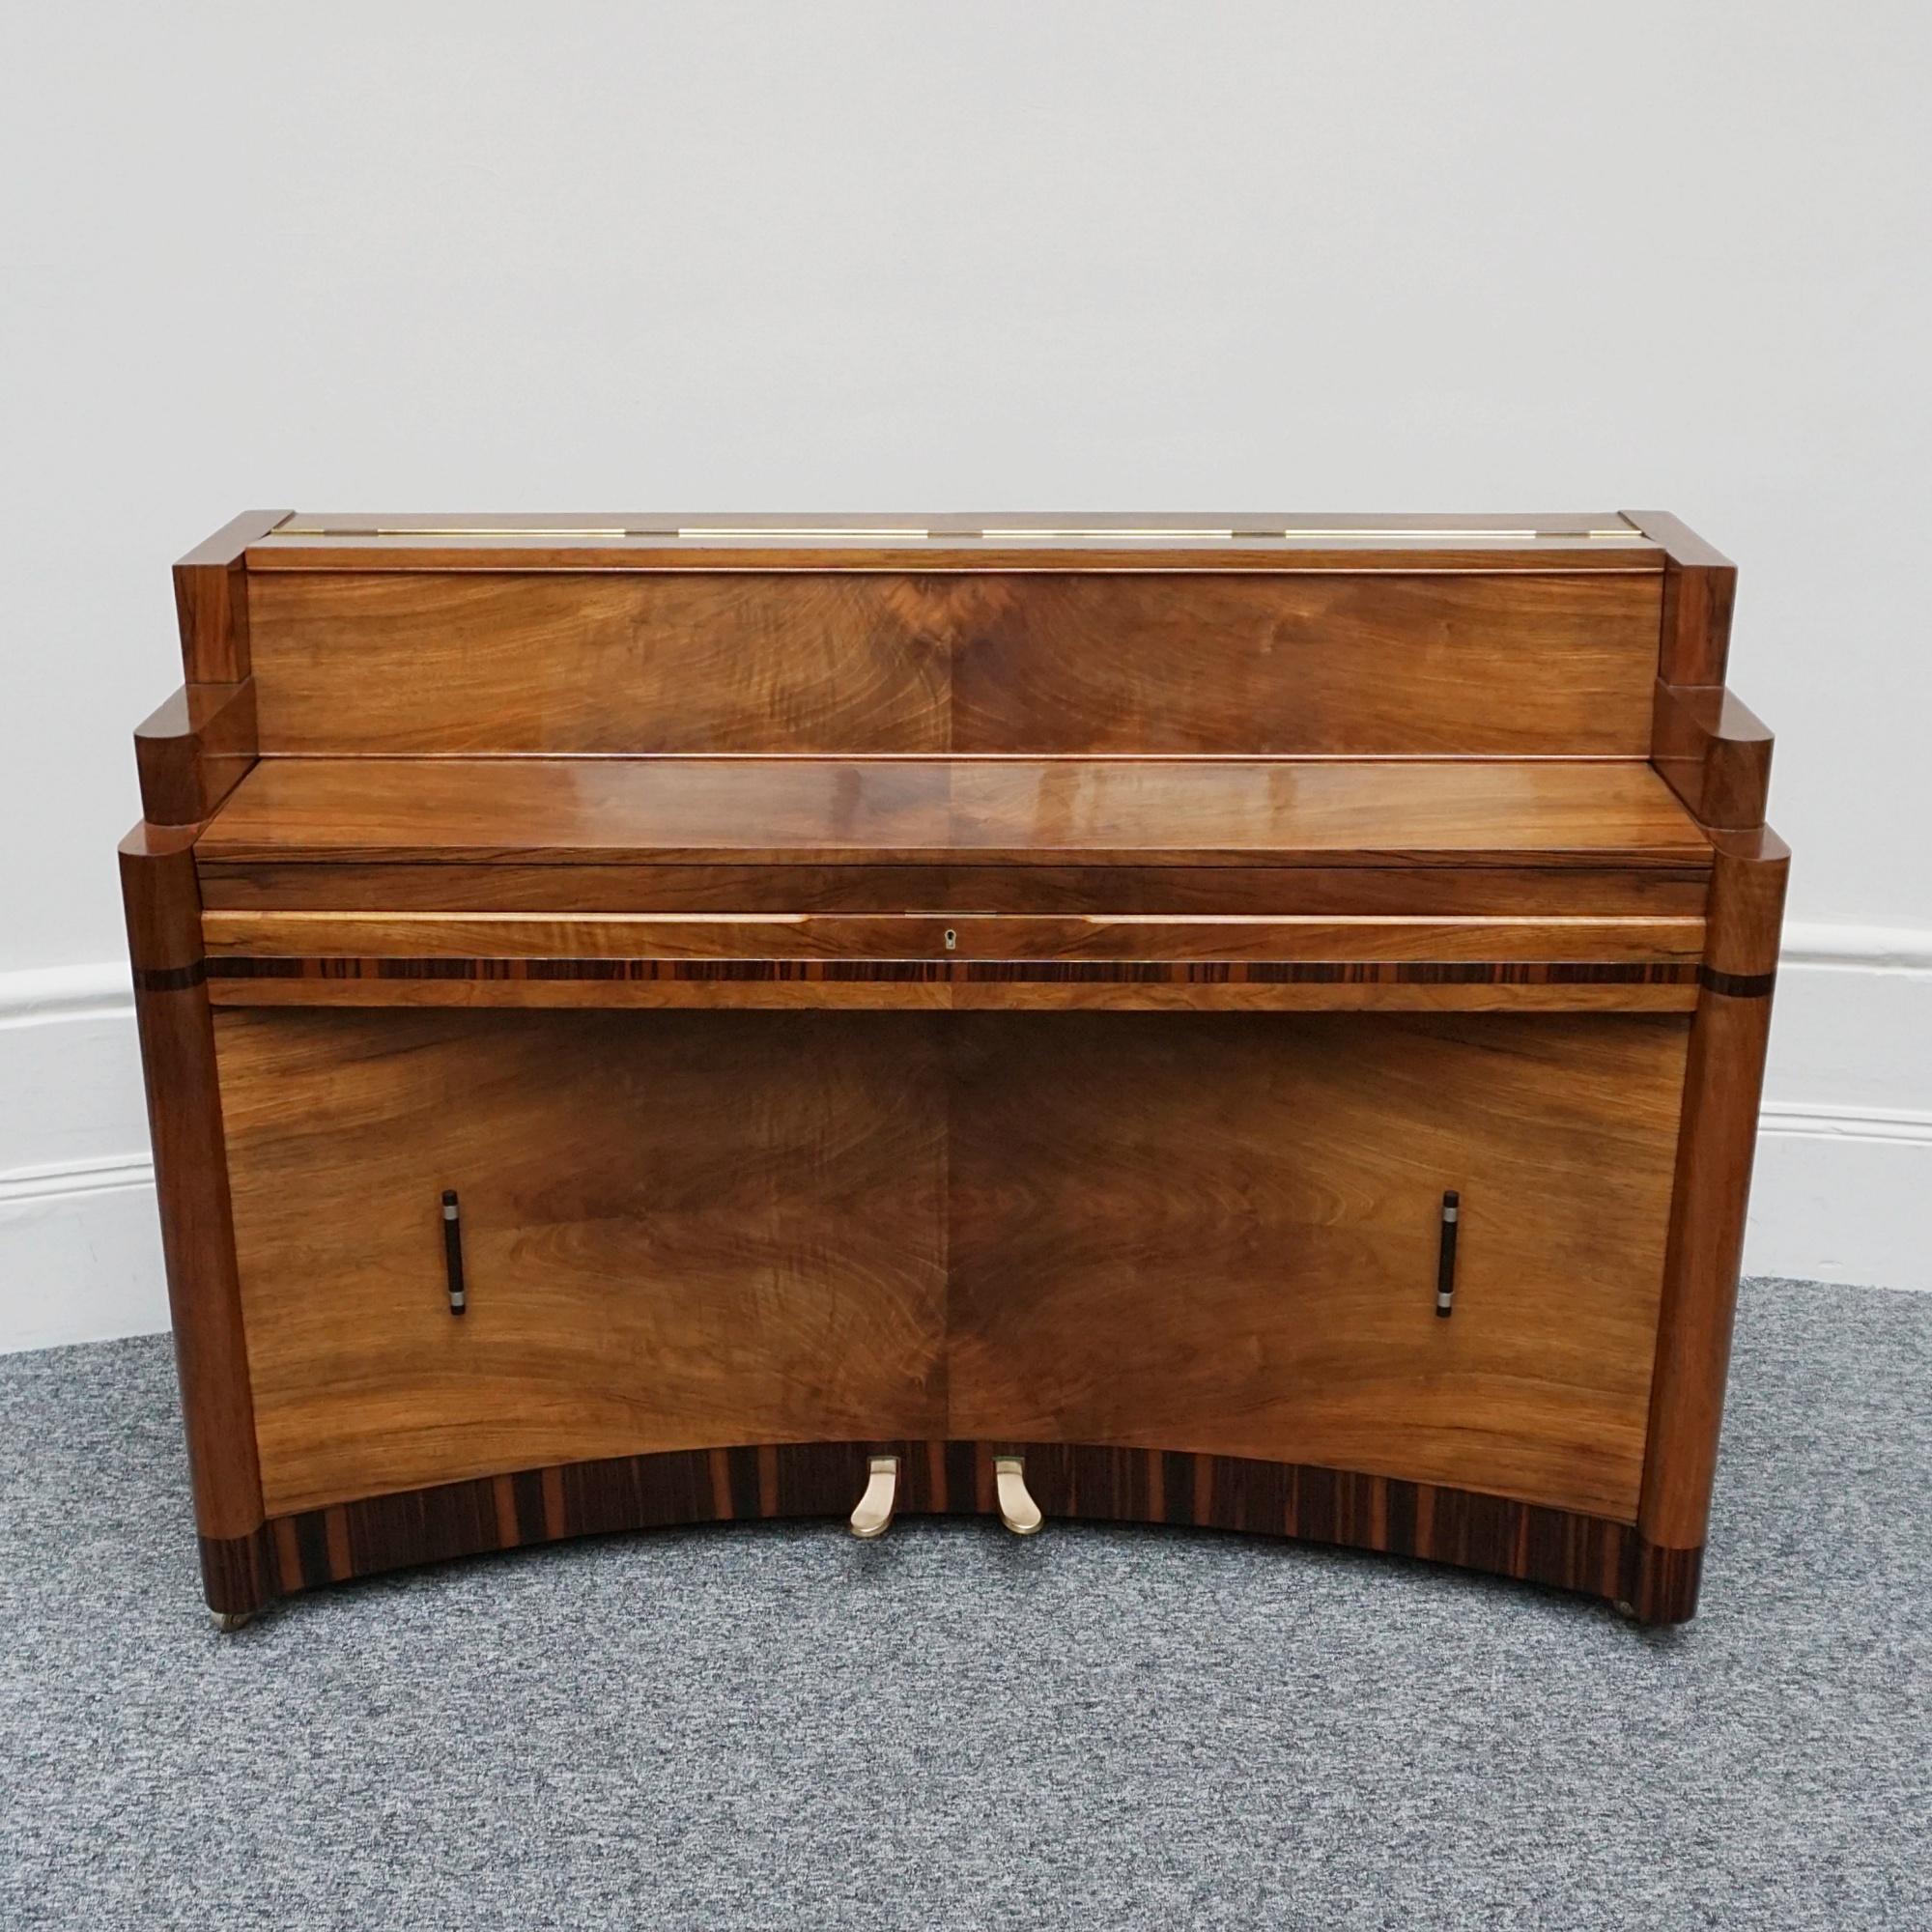 An Art Deco Steck Mini Piano. Burr and figured walnut throughout with macassar ebony banding. Original bakelite and metal handles to lower section. Original retailers mark to right hand side. Matching stool included but not photohraphed as currently